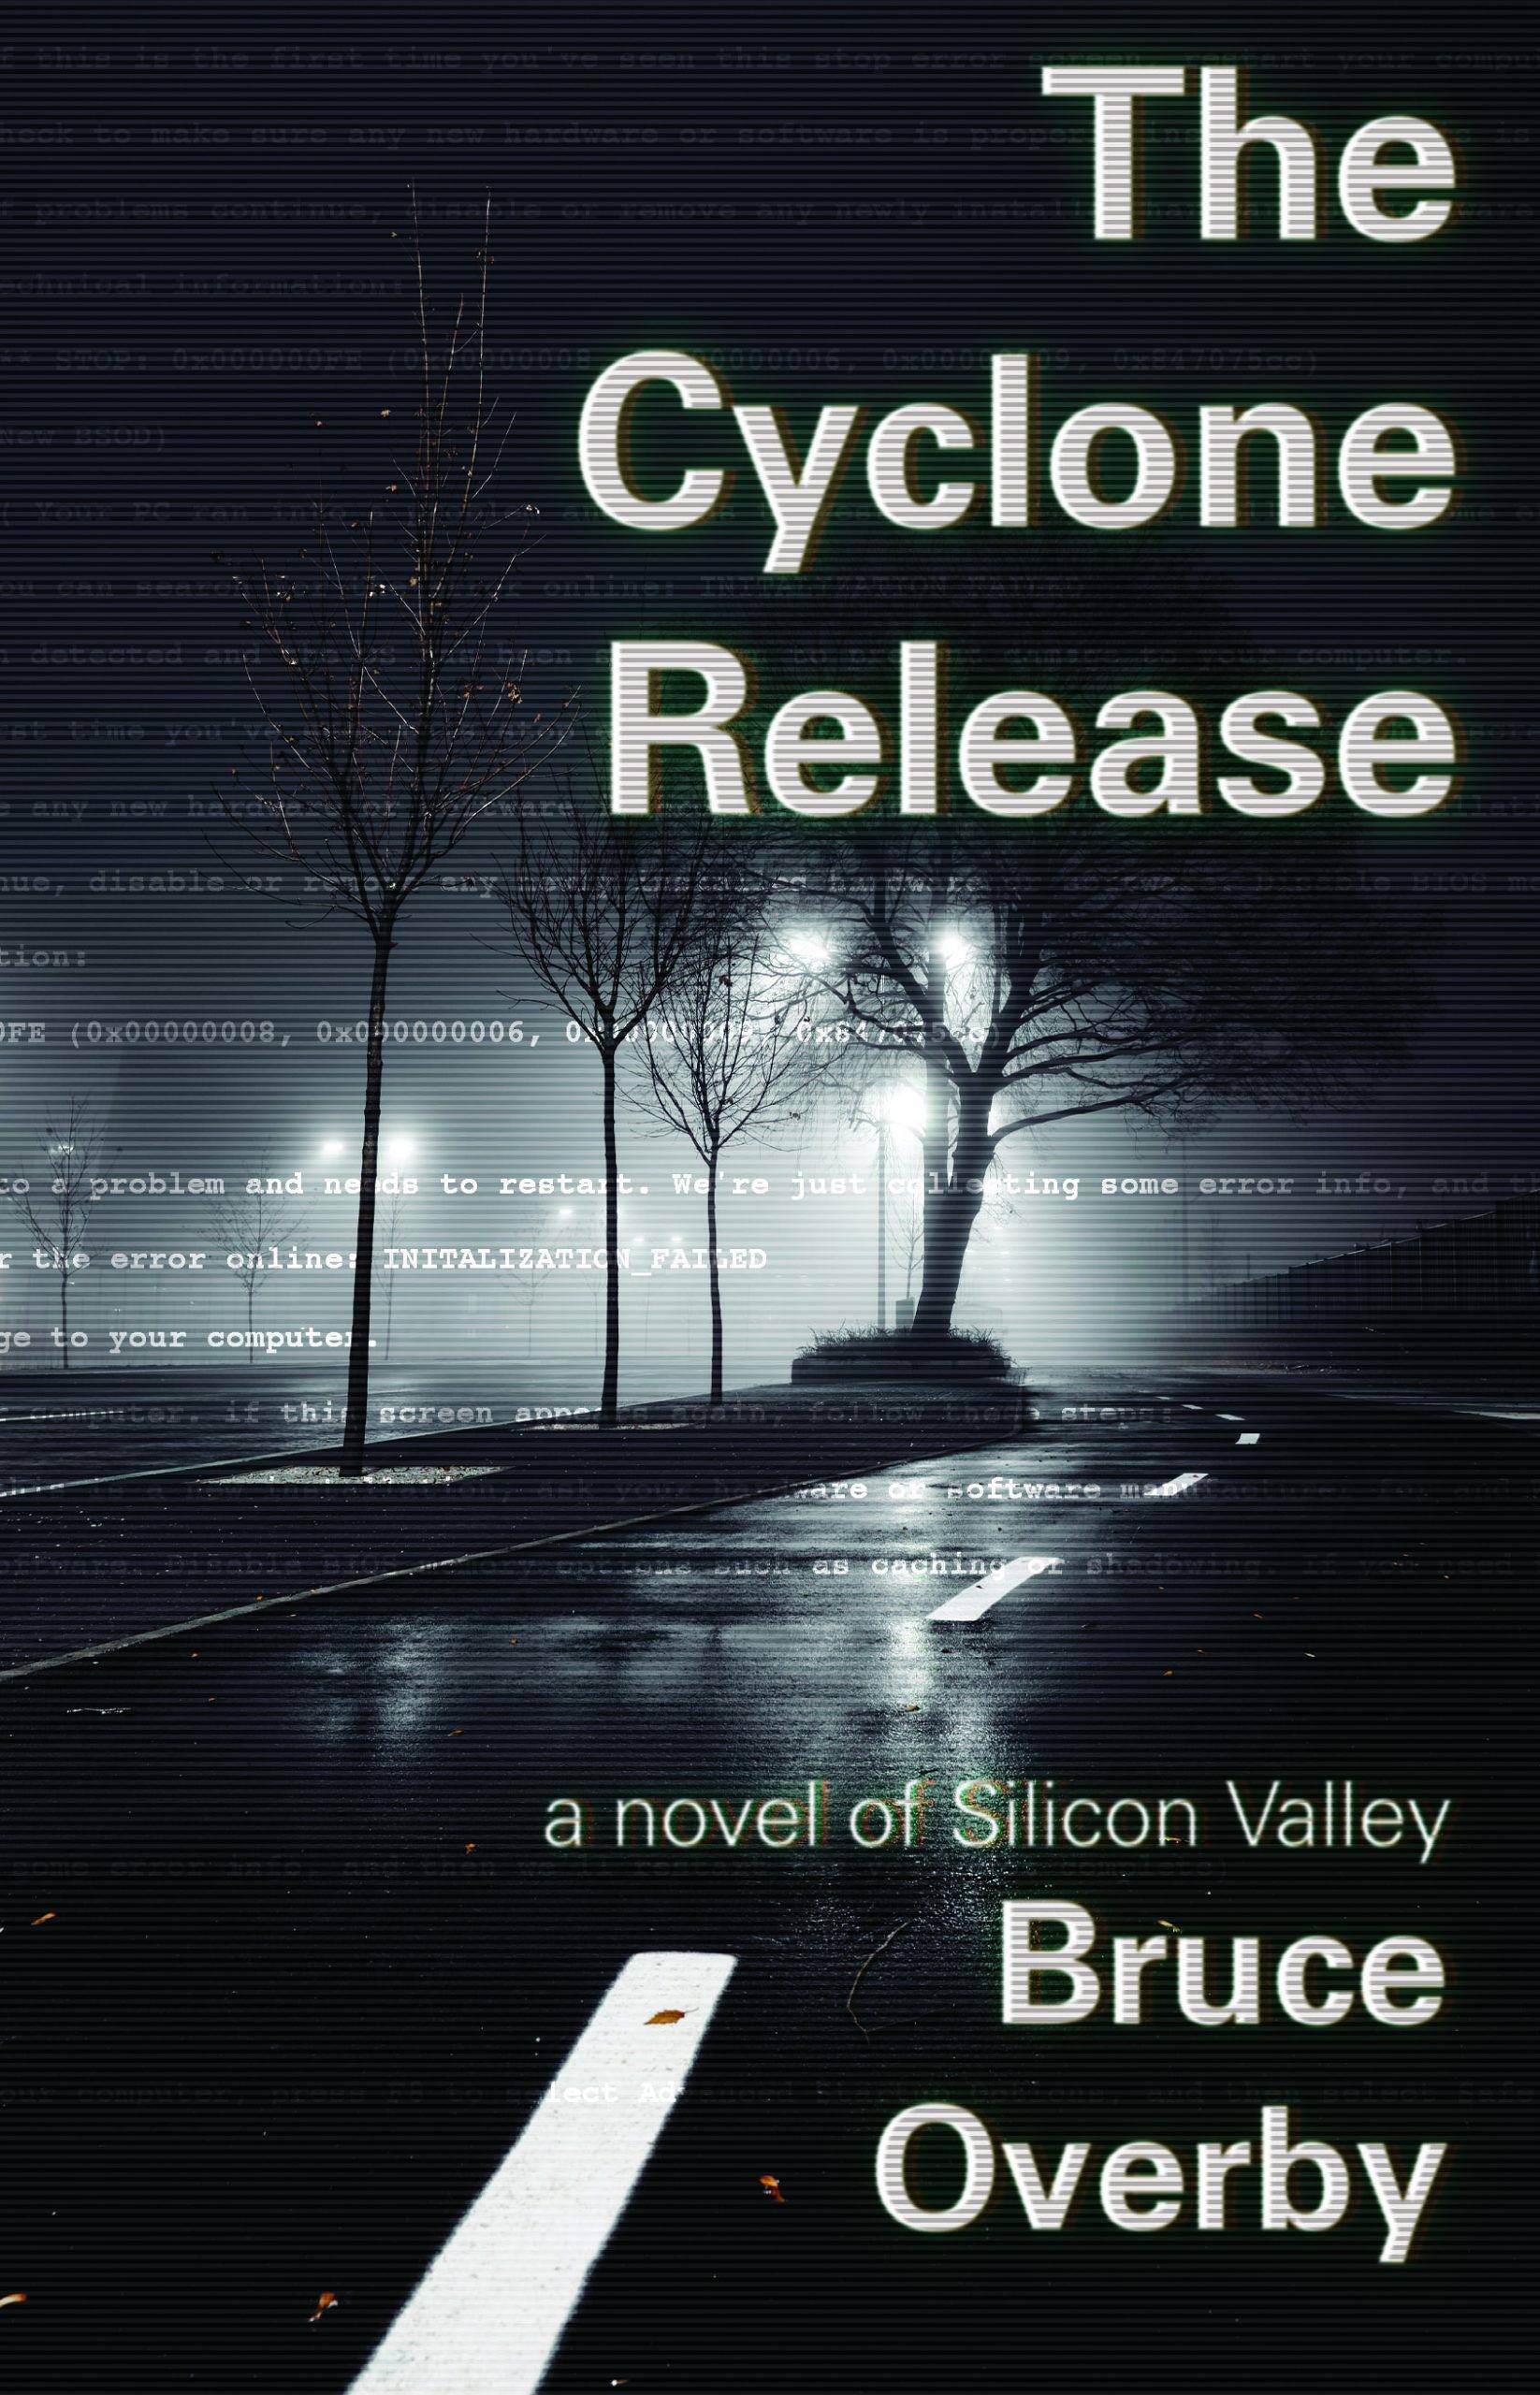 The Cyclone Release: A Novel of Silicon Valley by Bruce Overby. Wet road at night overlaid with ominous green computer code.